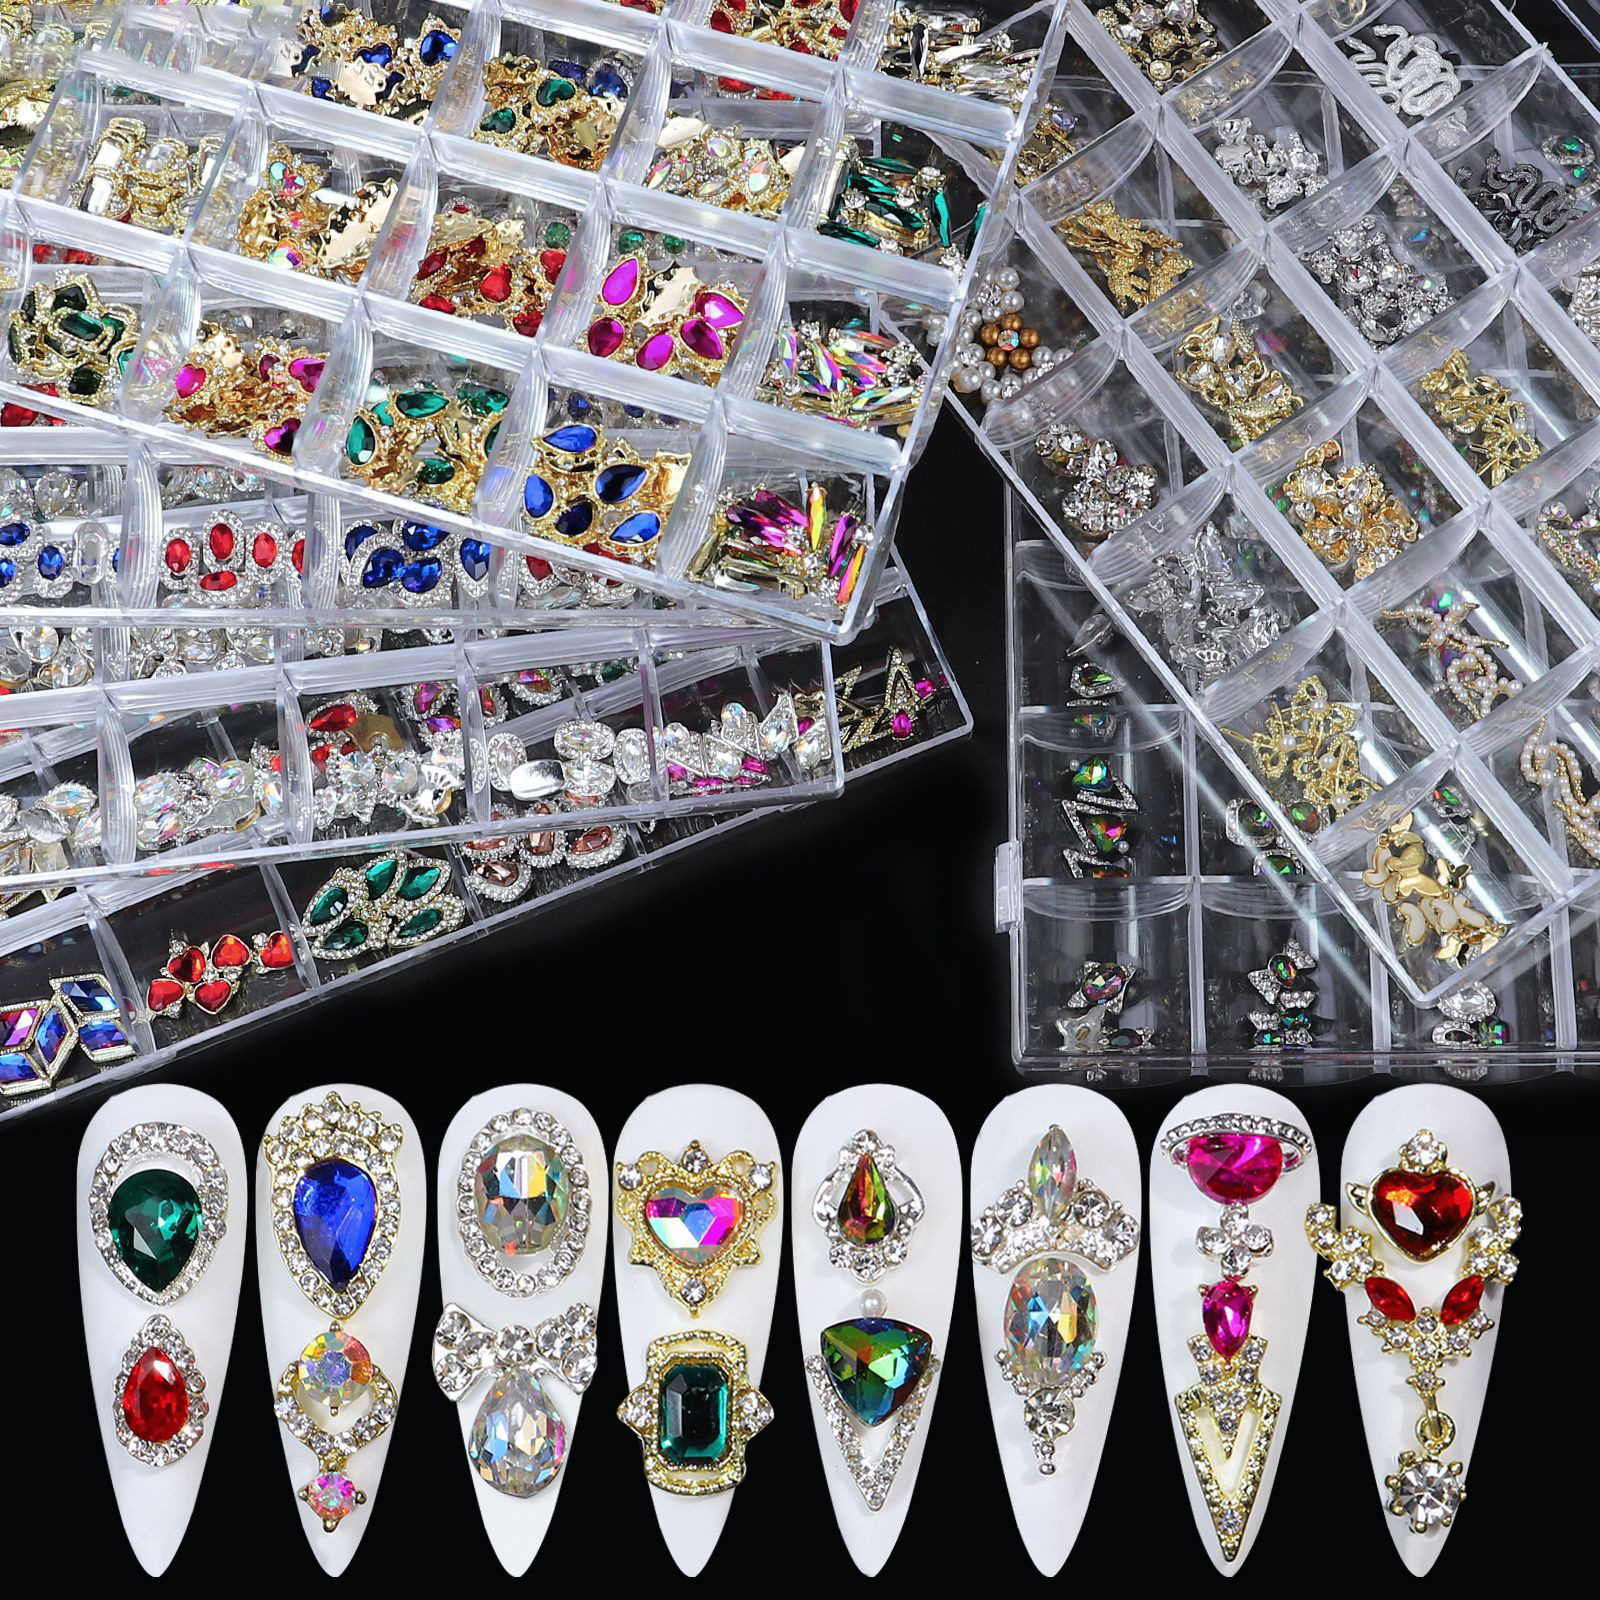 24 Boxed Butterfly Planet Alloy Manicure Crystal Rhinestones Kit For Nail Decoration